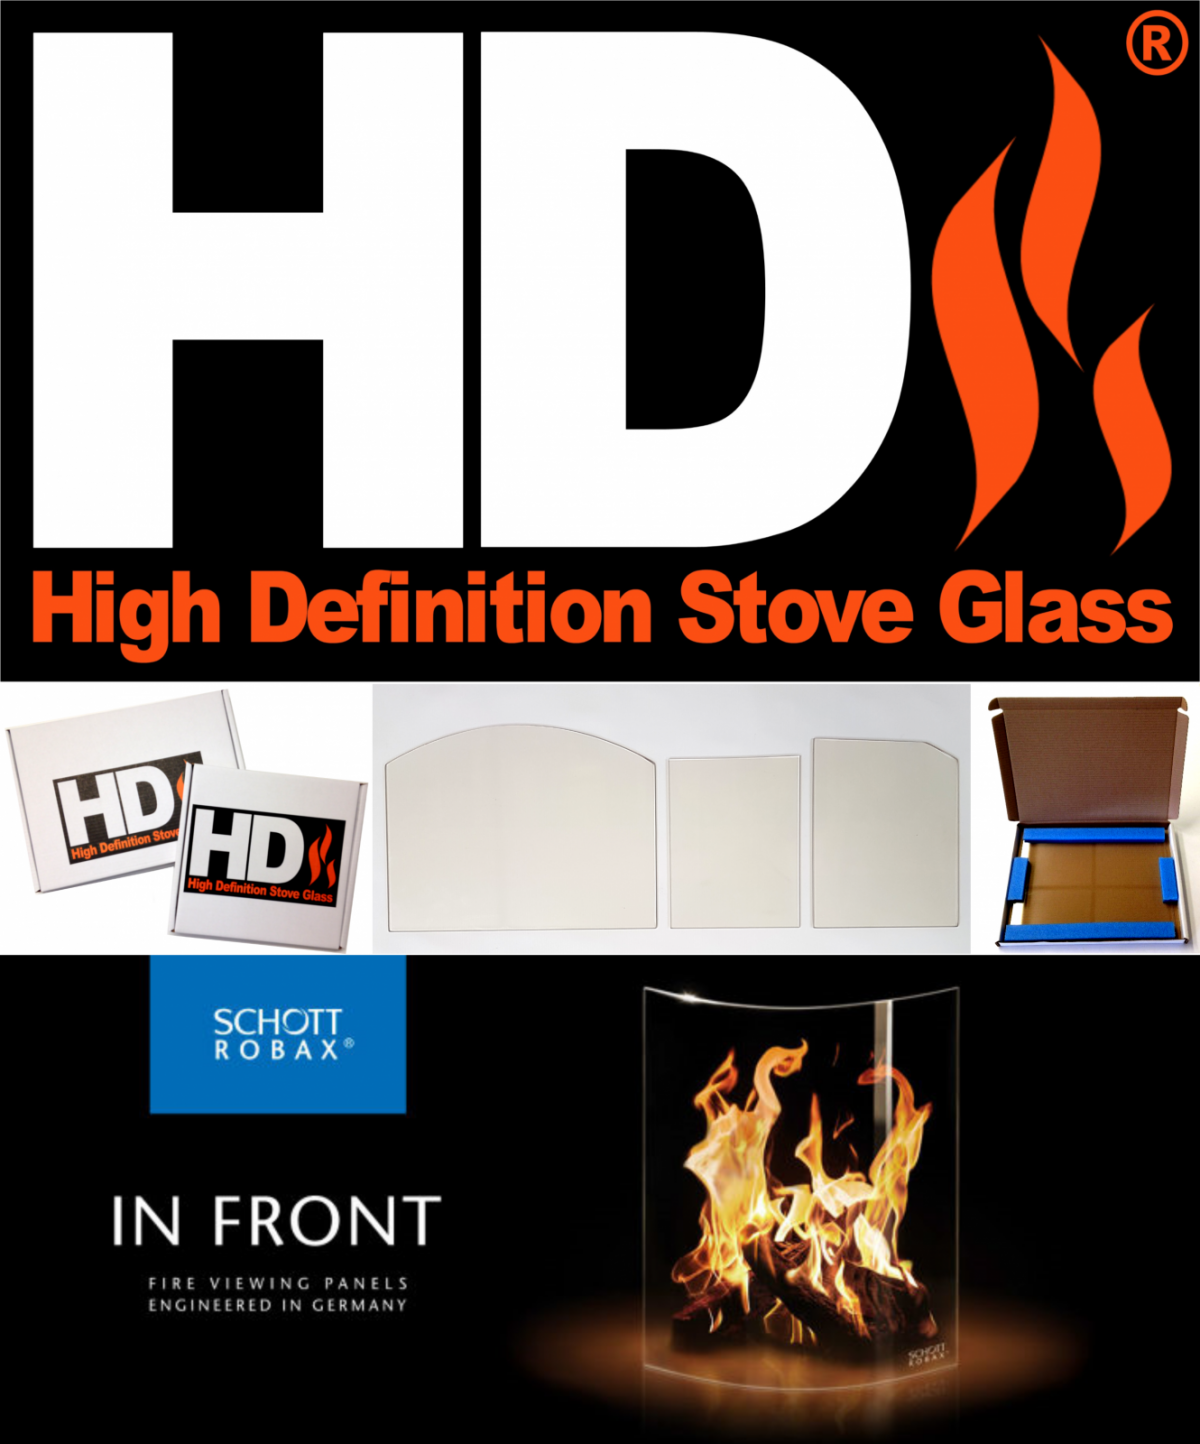 High Definition Stove Glass for the Evergreen ST2800 Rowan